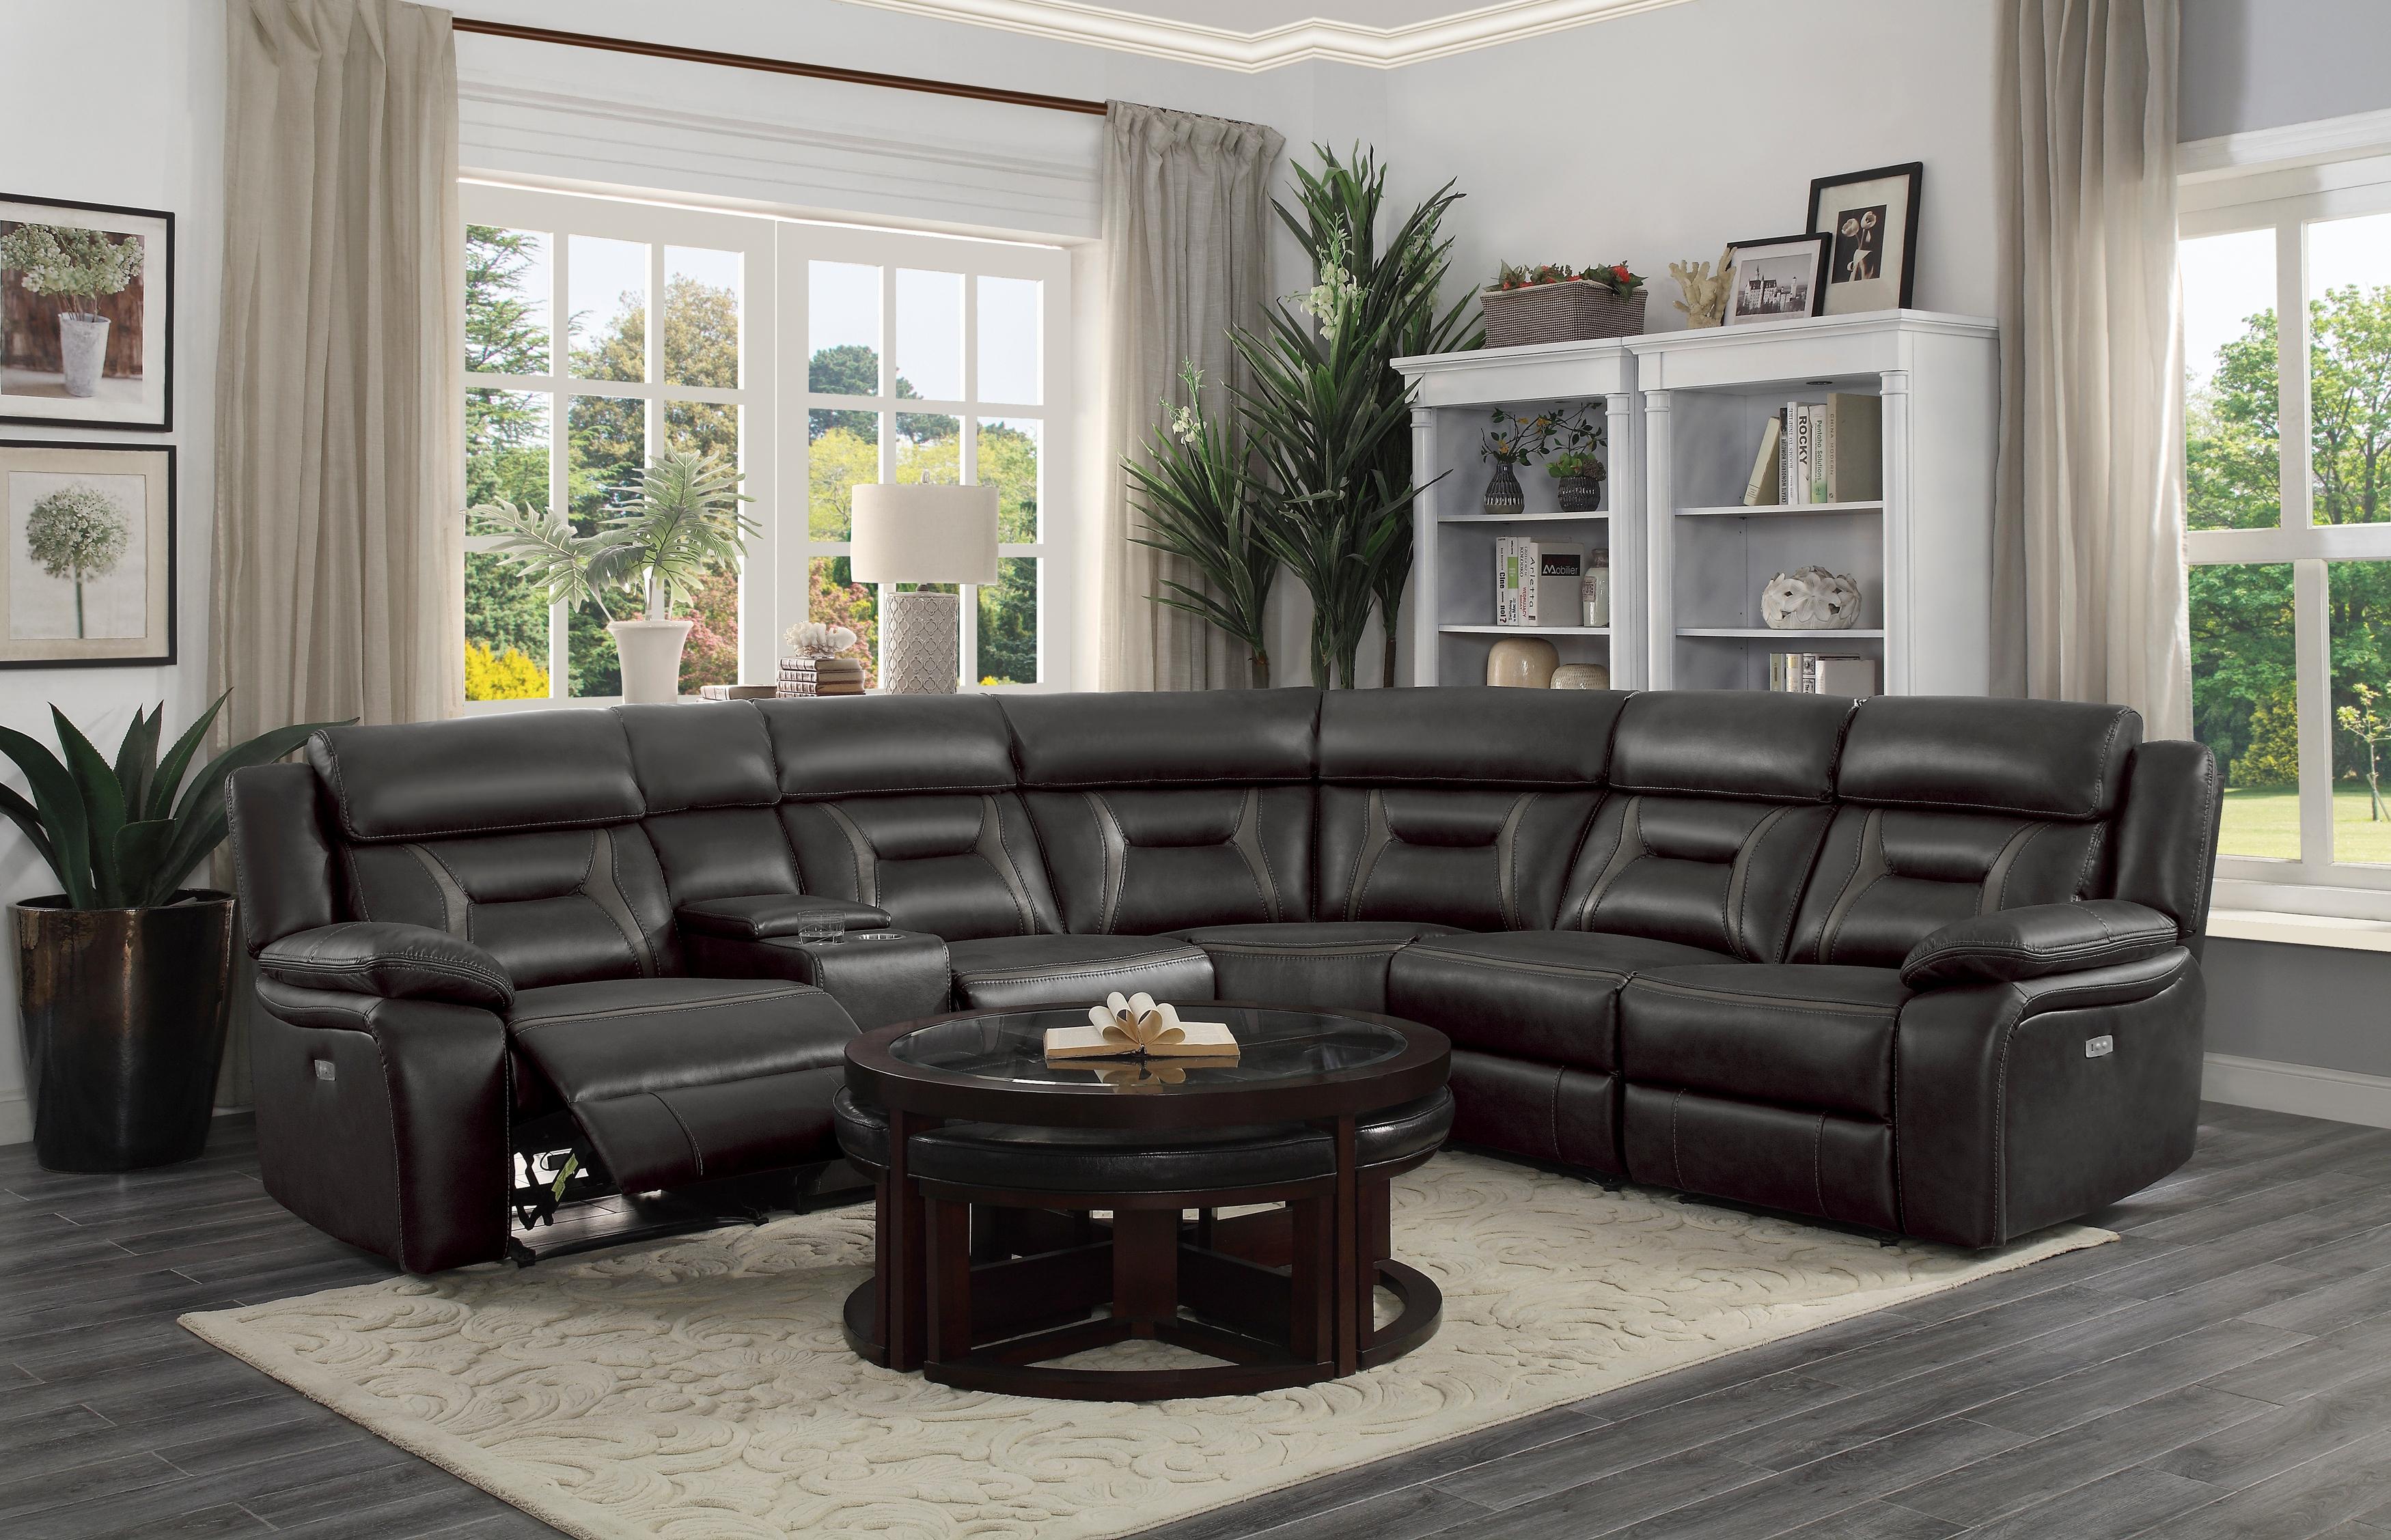 

    
8229DG*6PW Modern Dark Gray Faux Leather 6-Piece Power Reclining Sectional Homelegance 8229DG*6PW Amite
